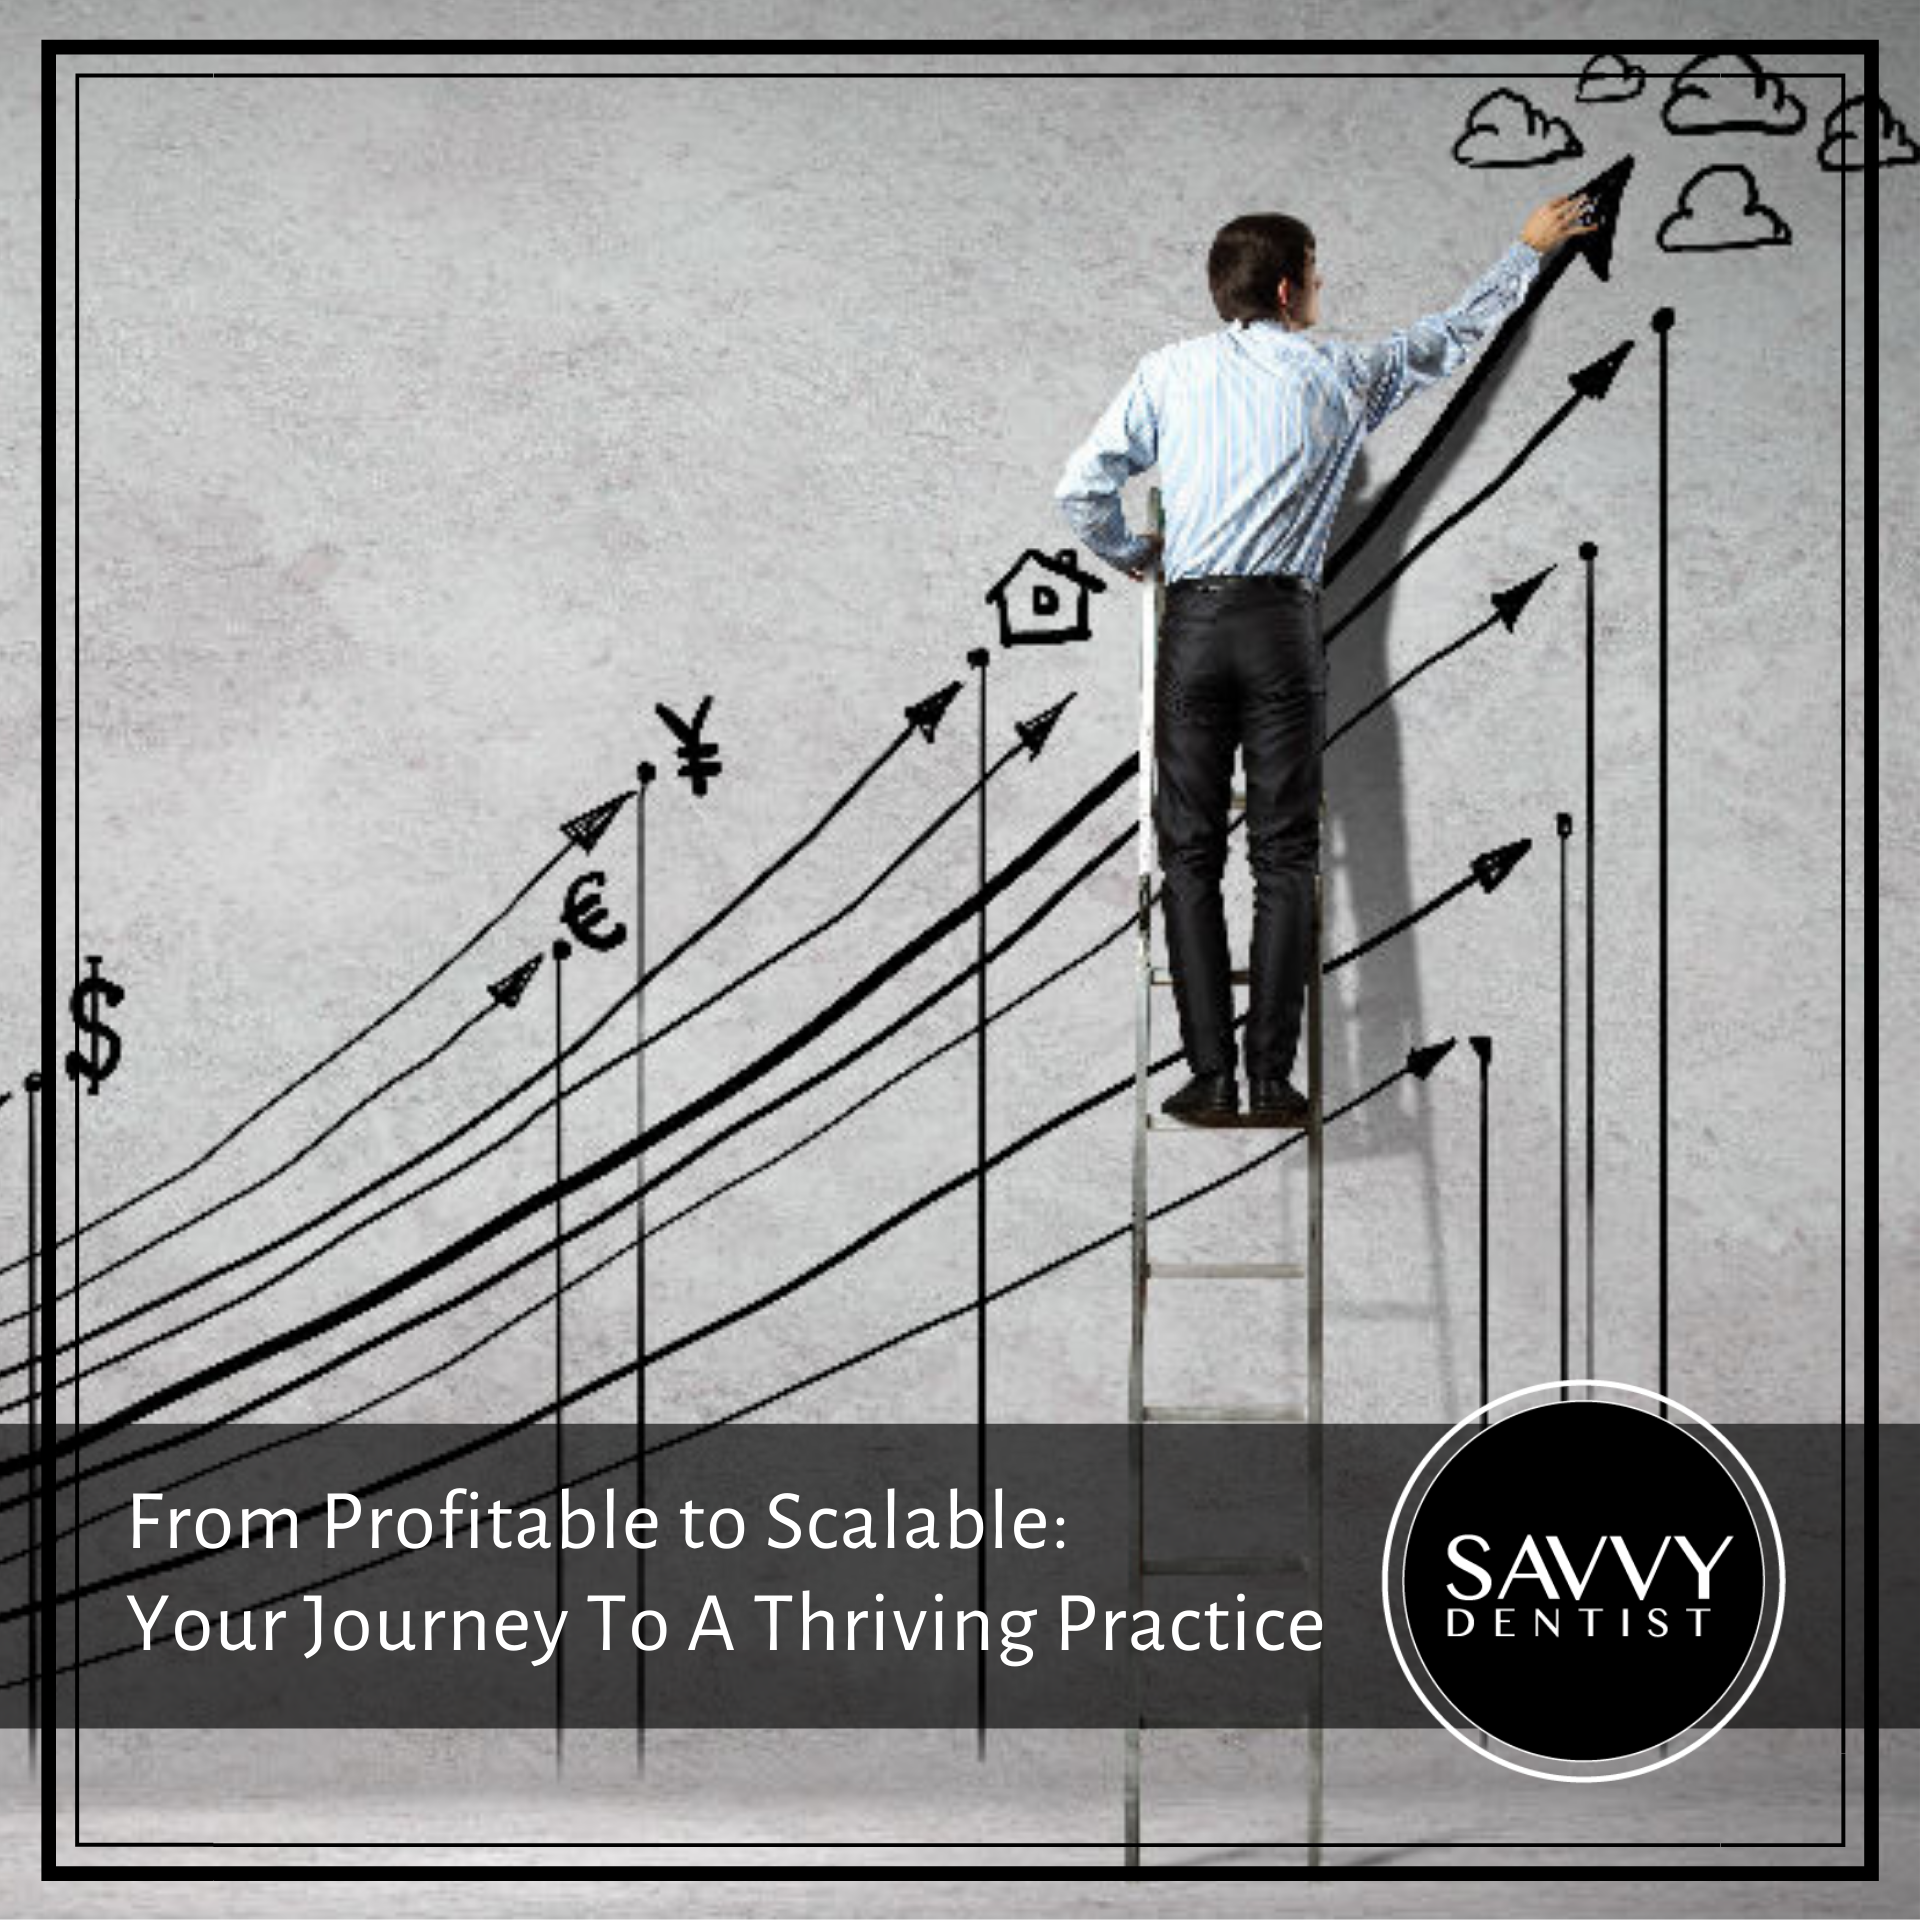 From Profitable to Scalable: Your Journey To A Thriving Practice